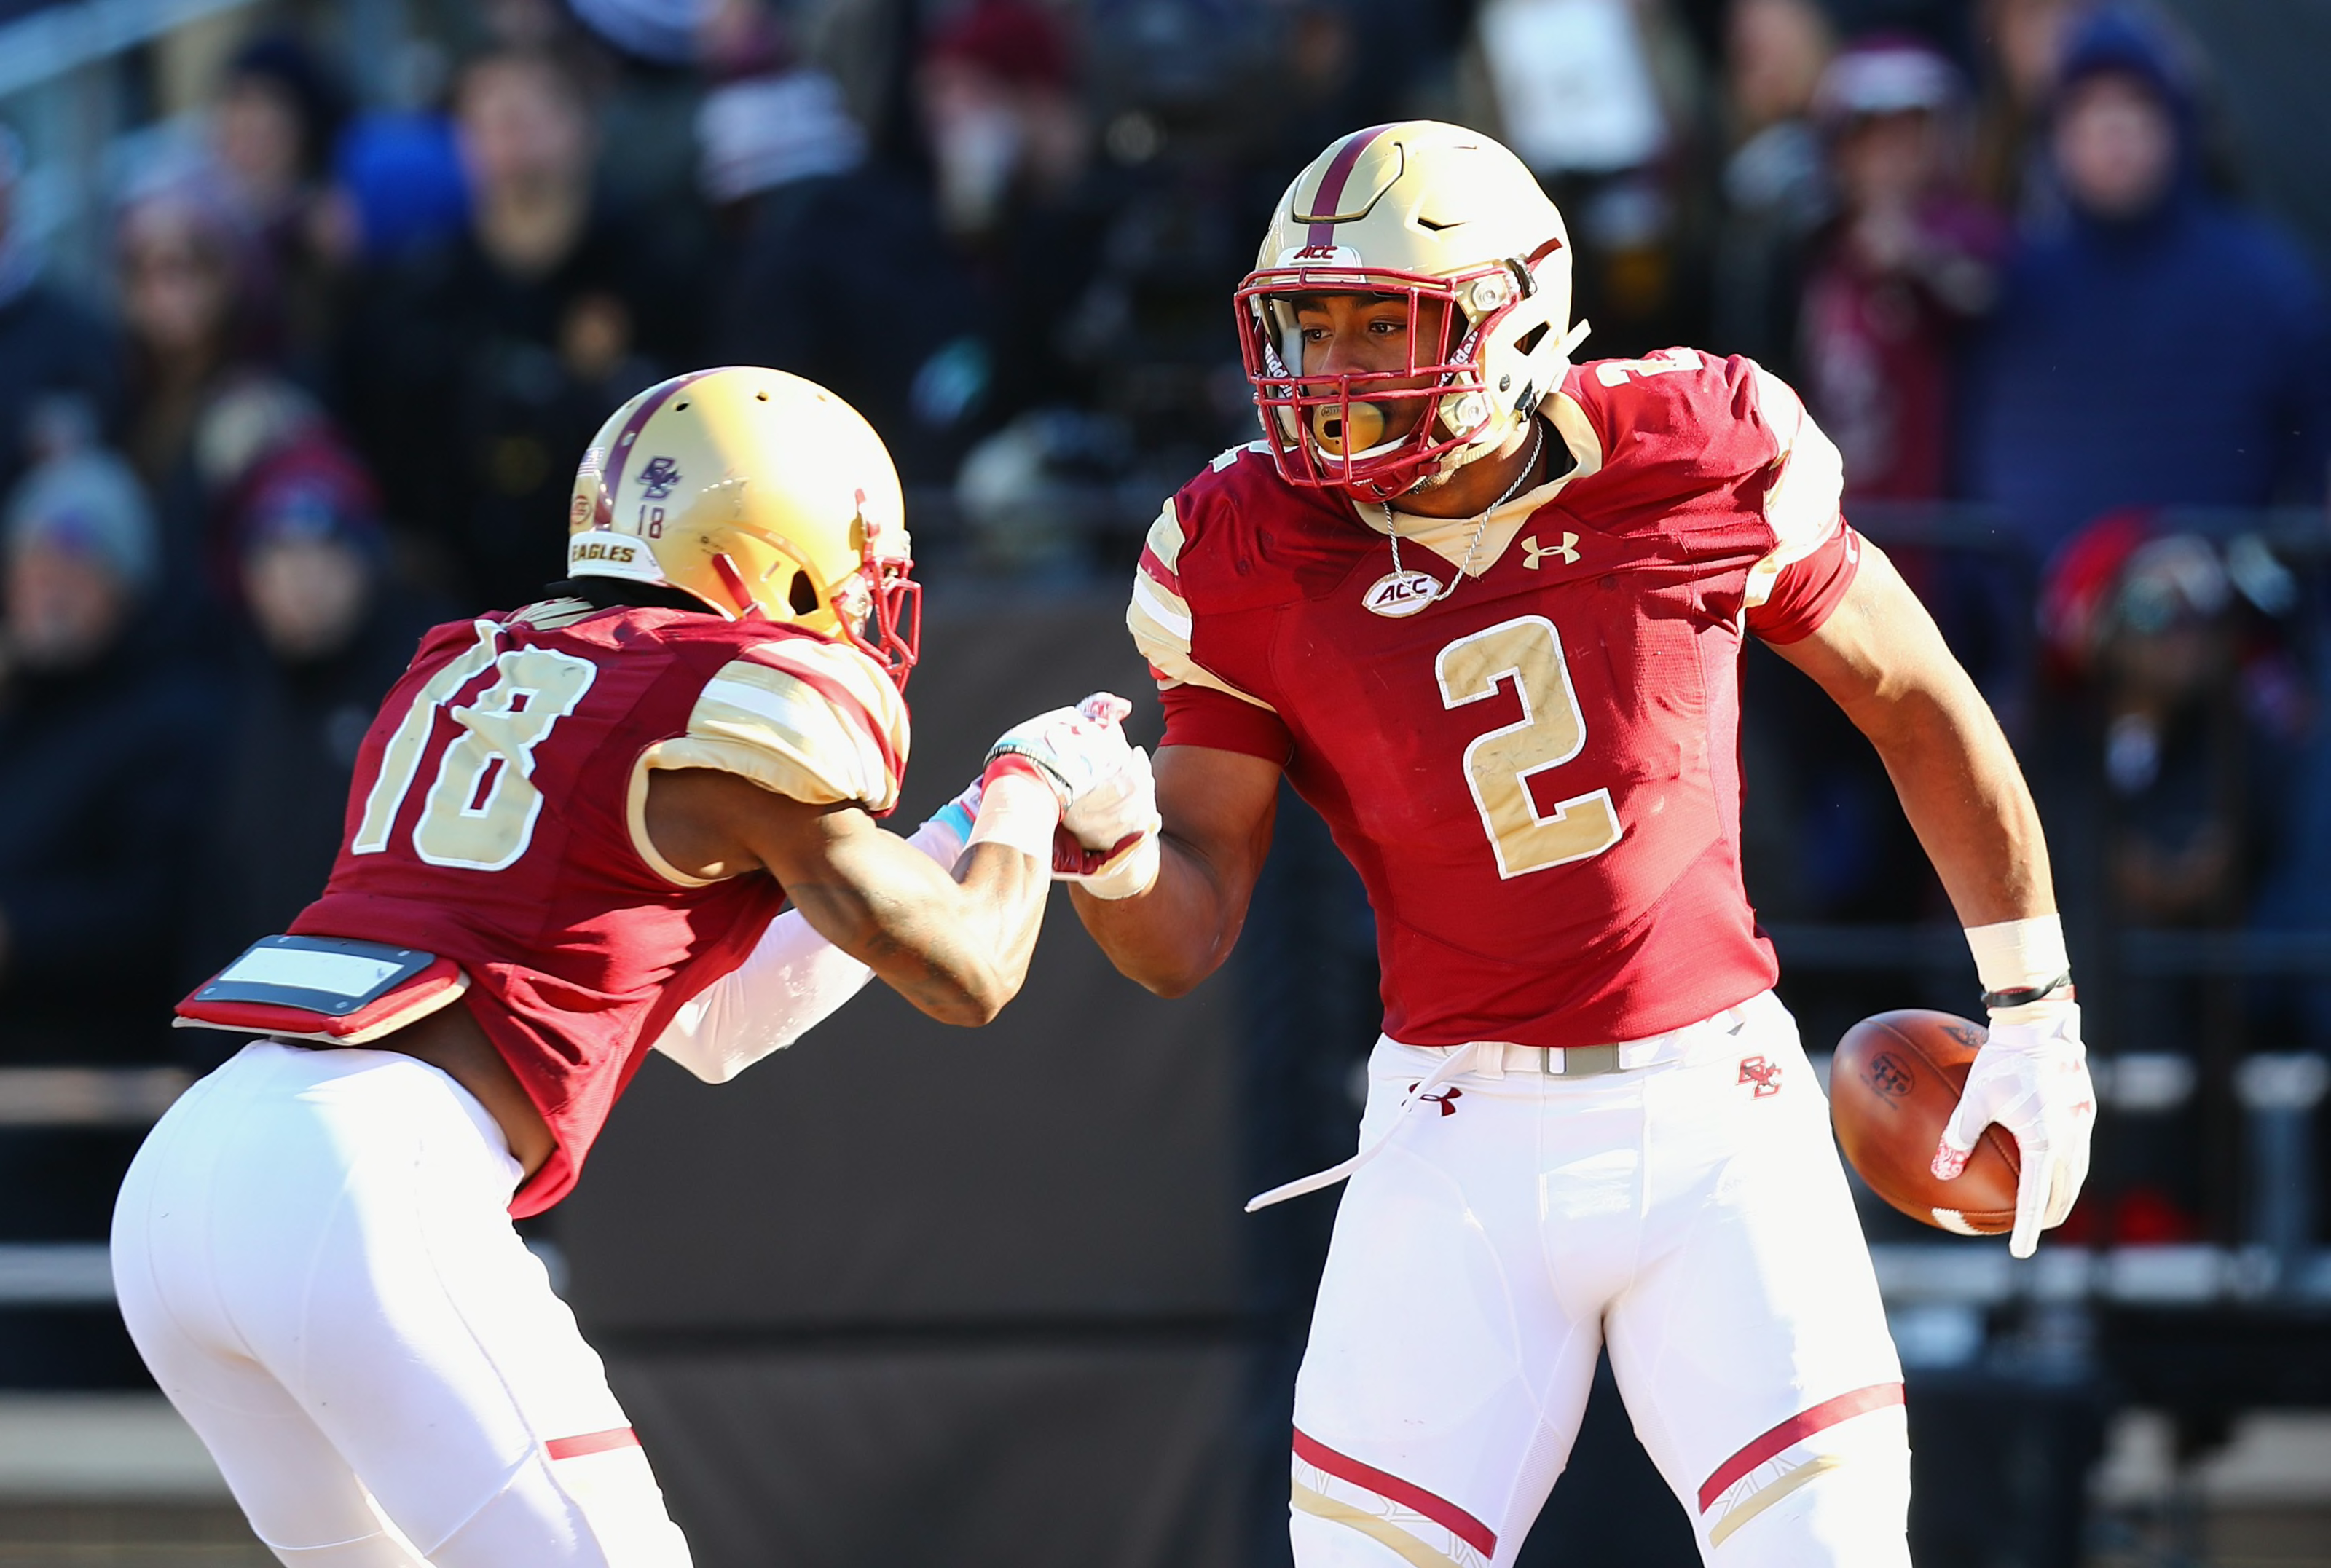 Boston College RB AJ Dillon is the best running back in college